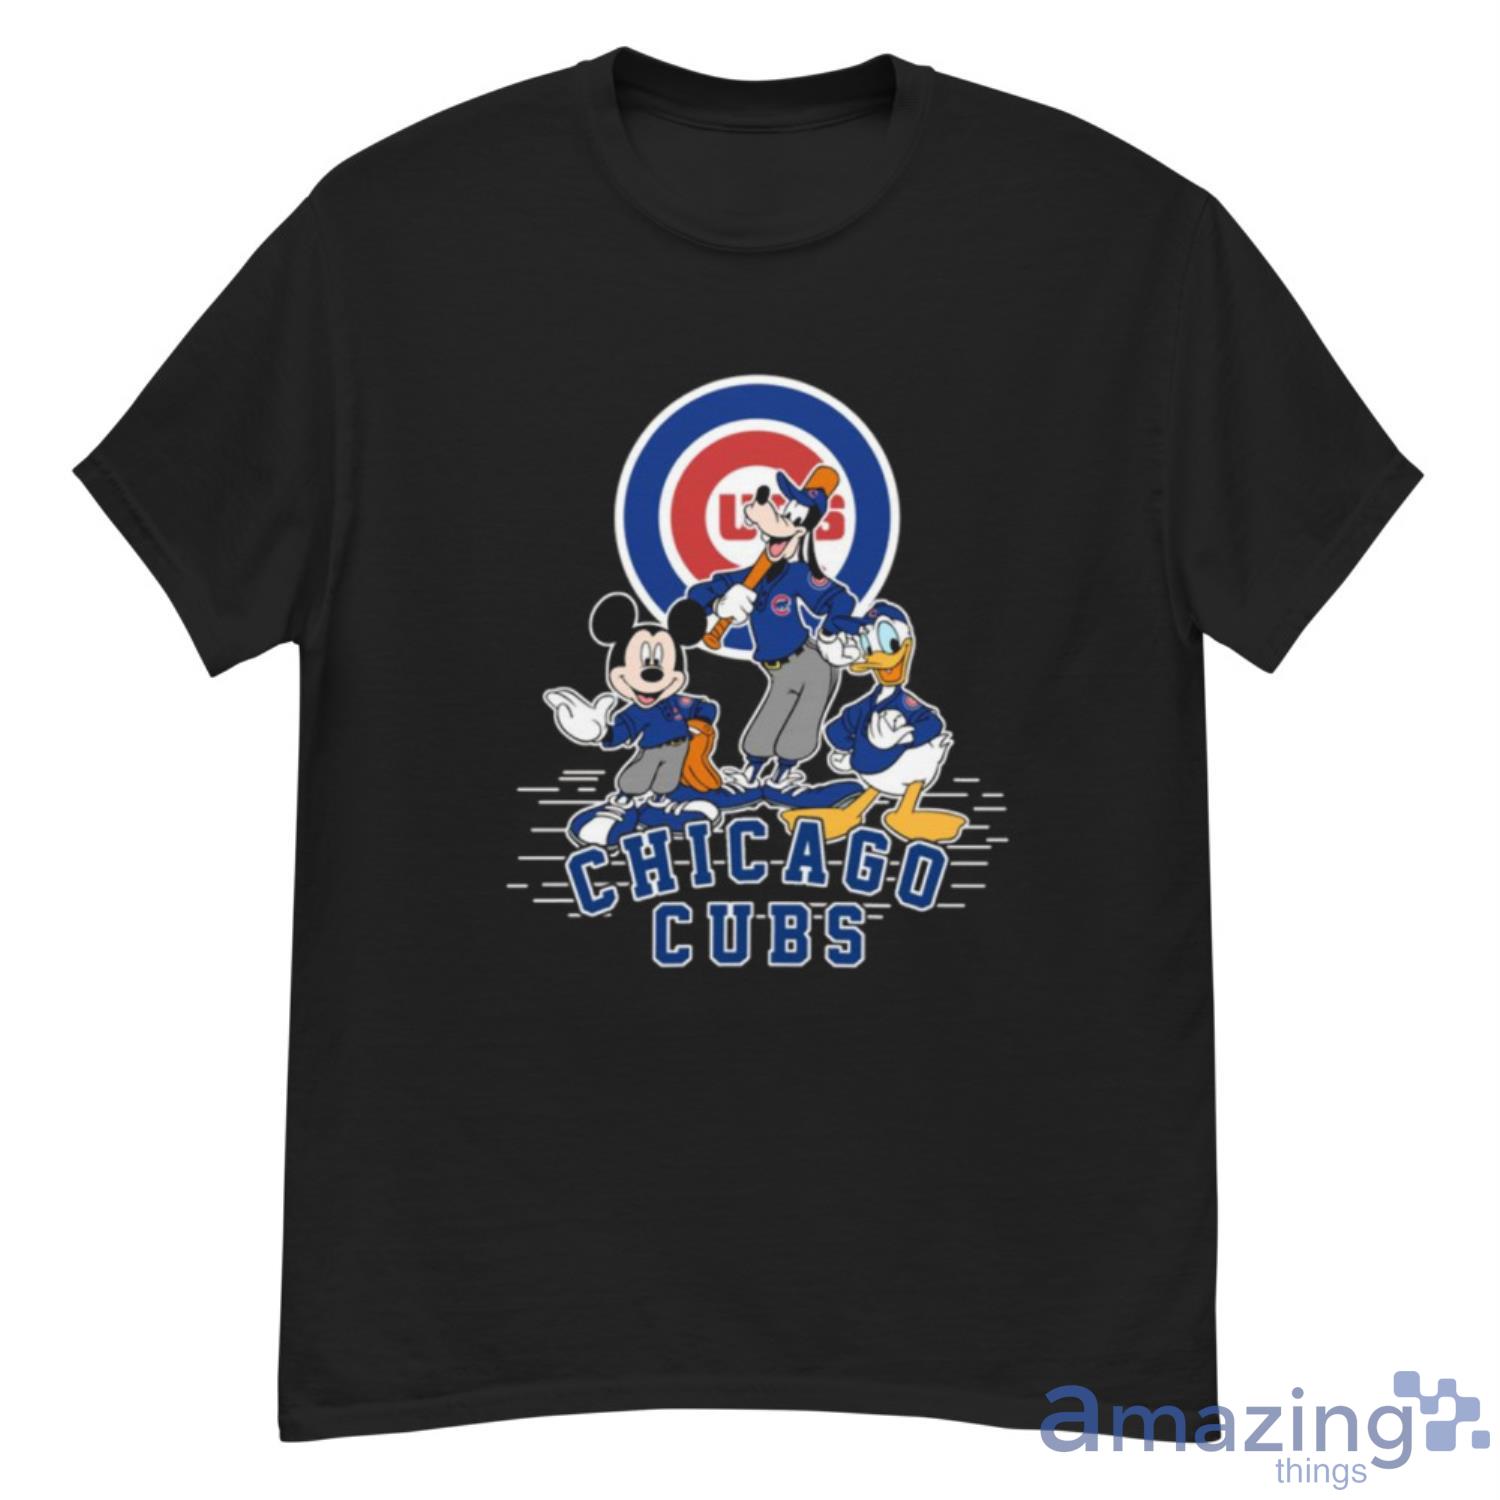 MLB, Shirts & Tops, Chicago Cubs 3t Tee